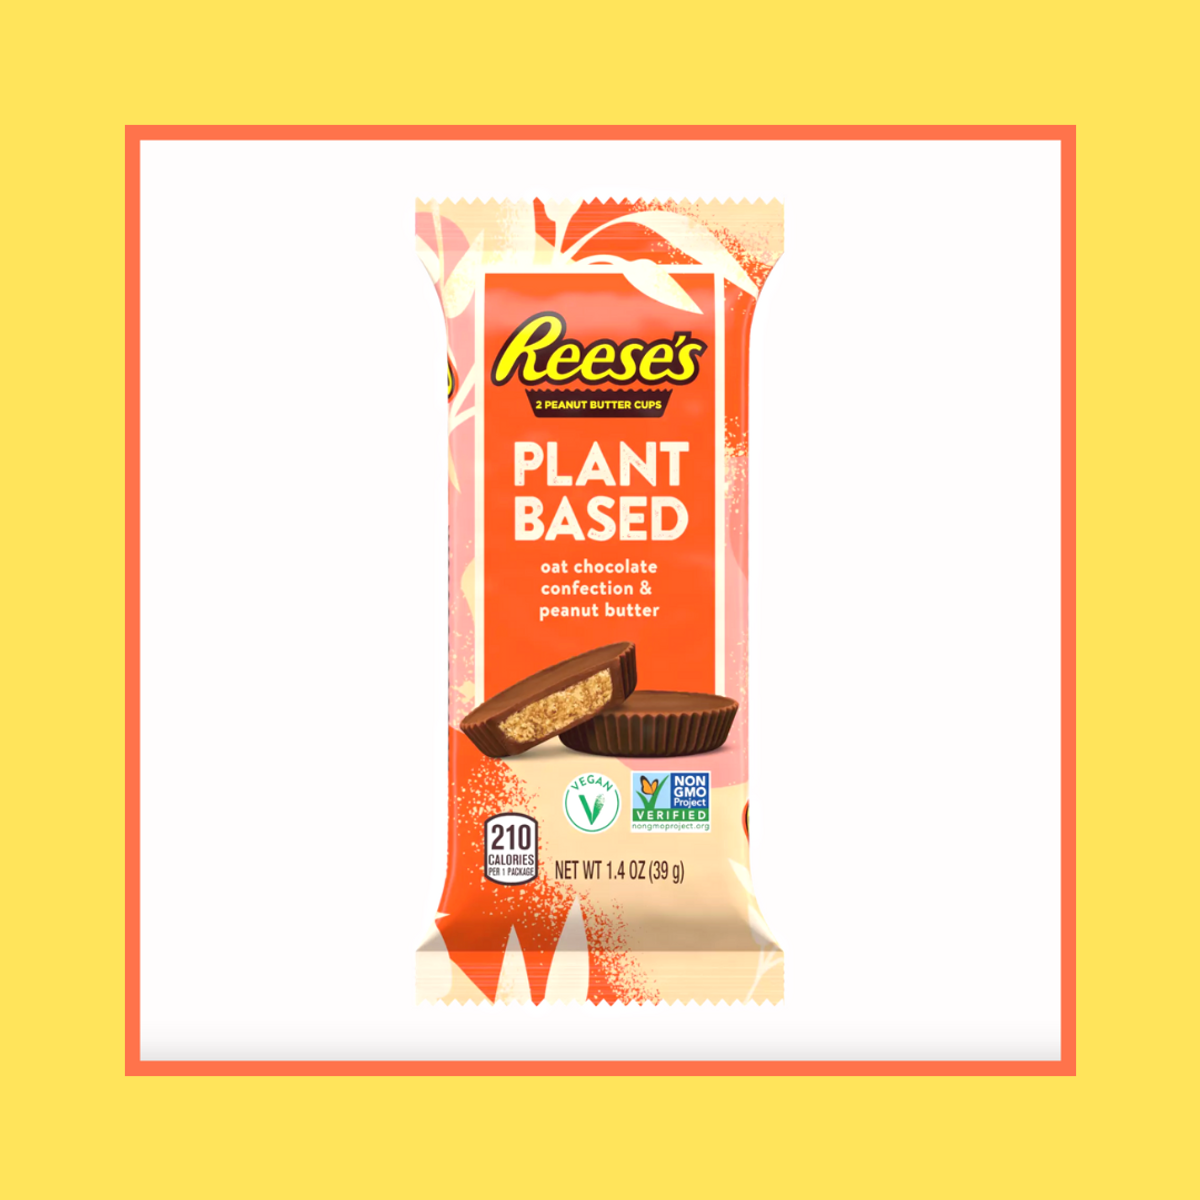 vegan reese's cups, plant-based chocolate